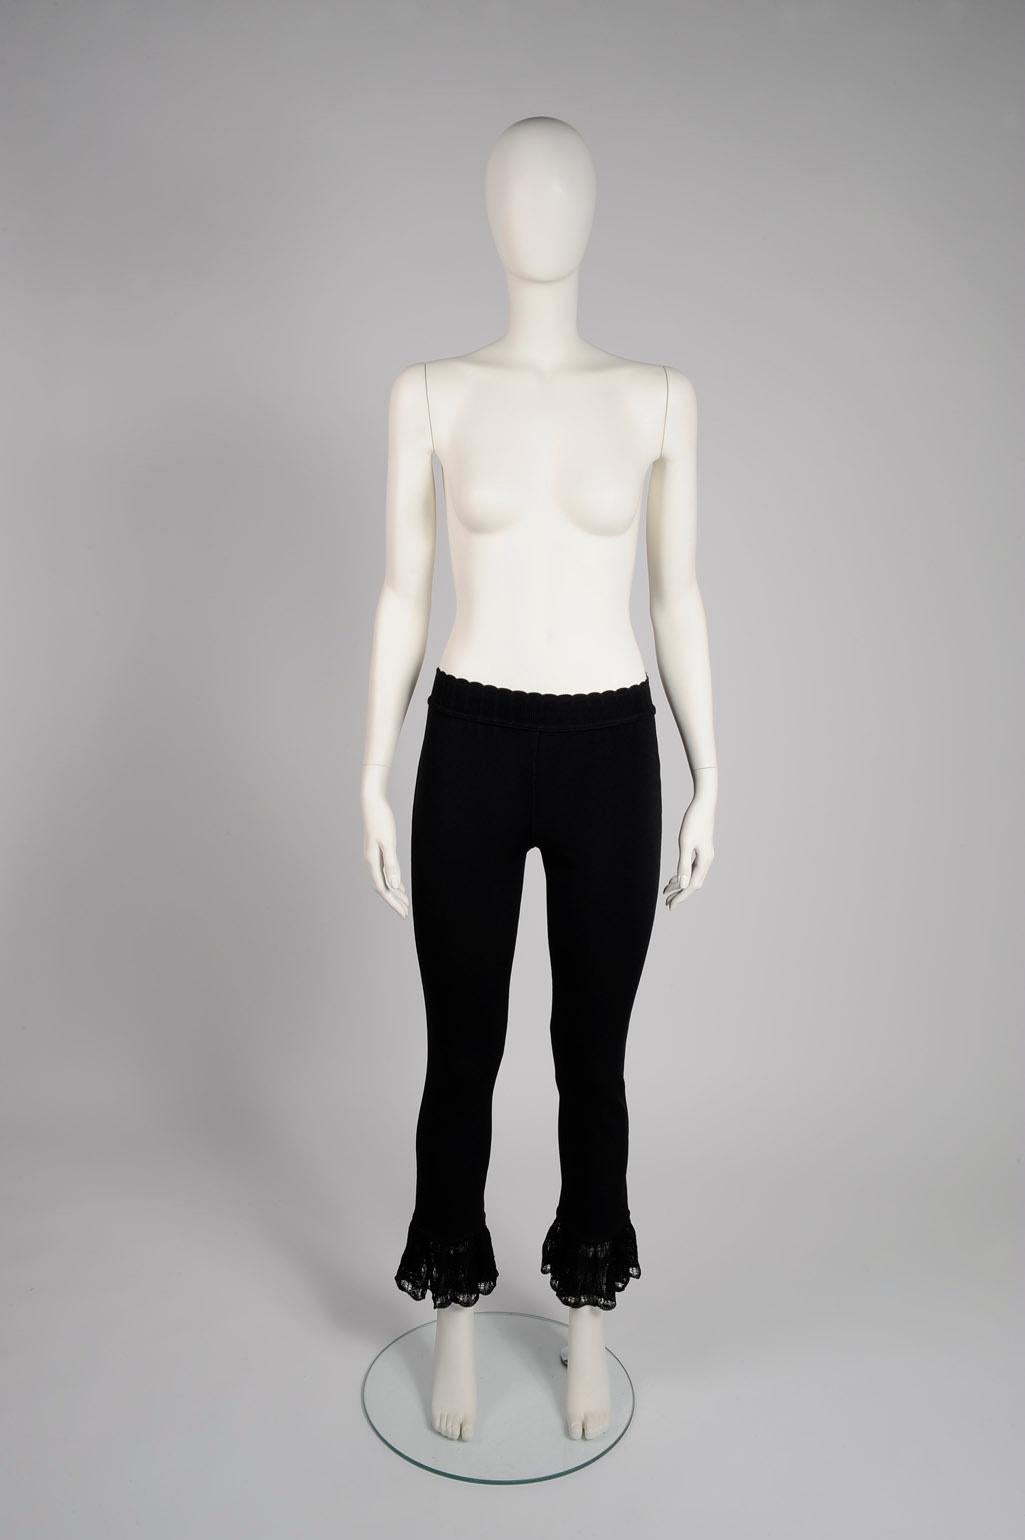 Made from one of his signature stretch knits, these Alaia’s iconic Spring-Summer 1992 collection leggings are 